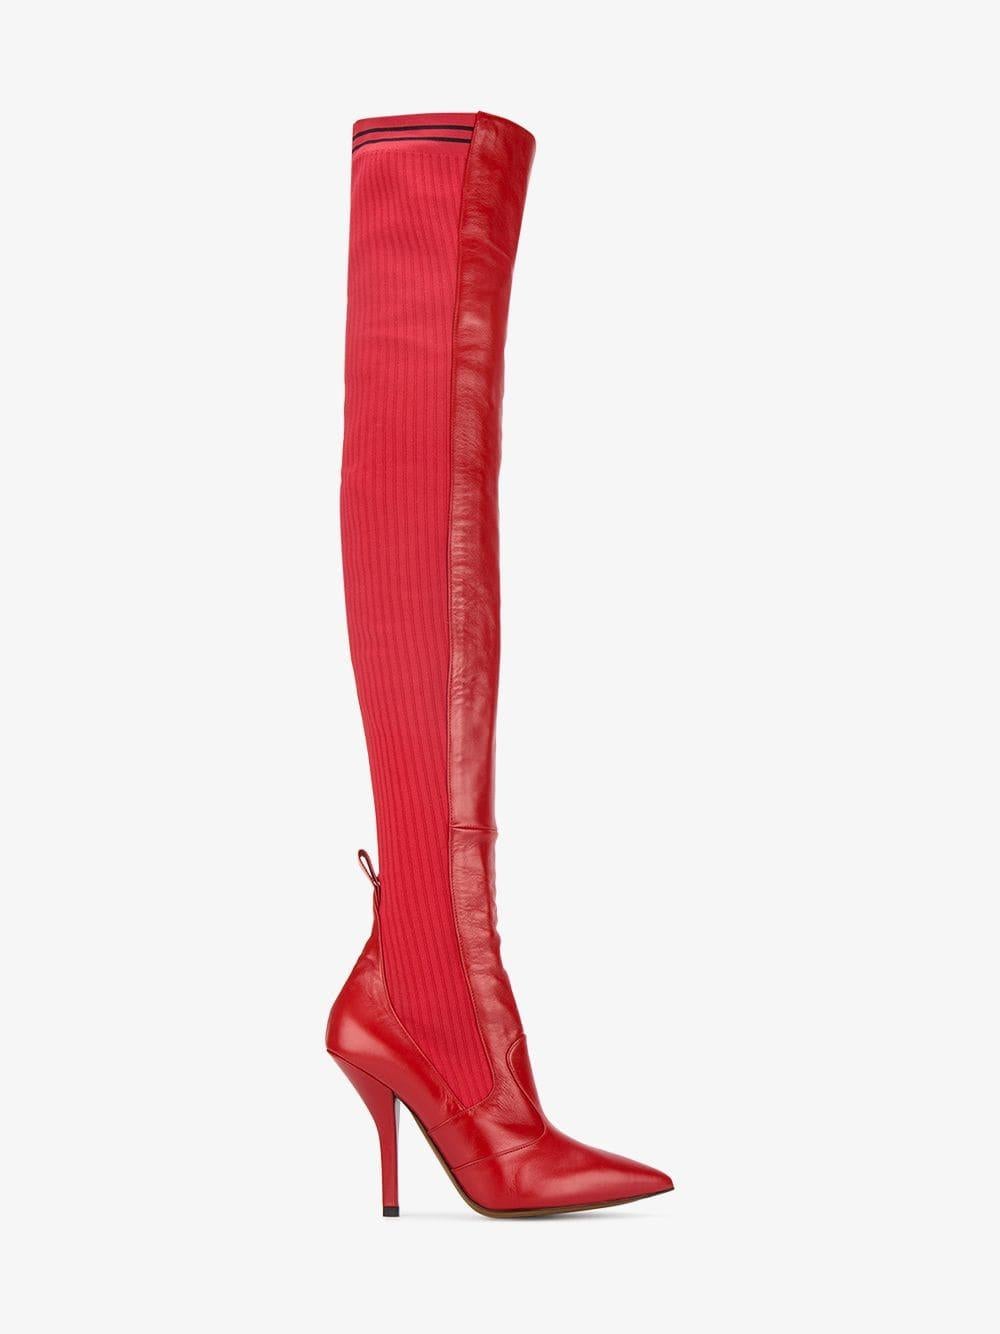 Fendi NEW Runway Red Leather Knit Sock Thigh High Evening Heels Boots  1